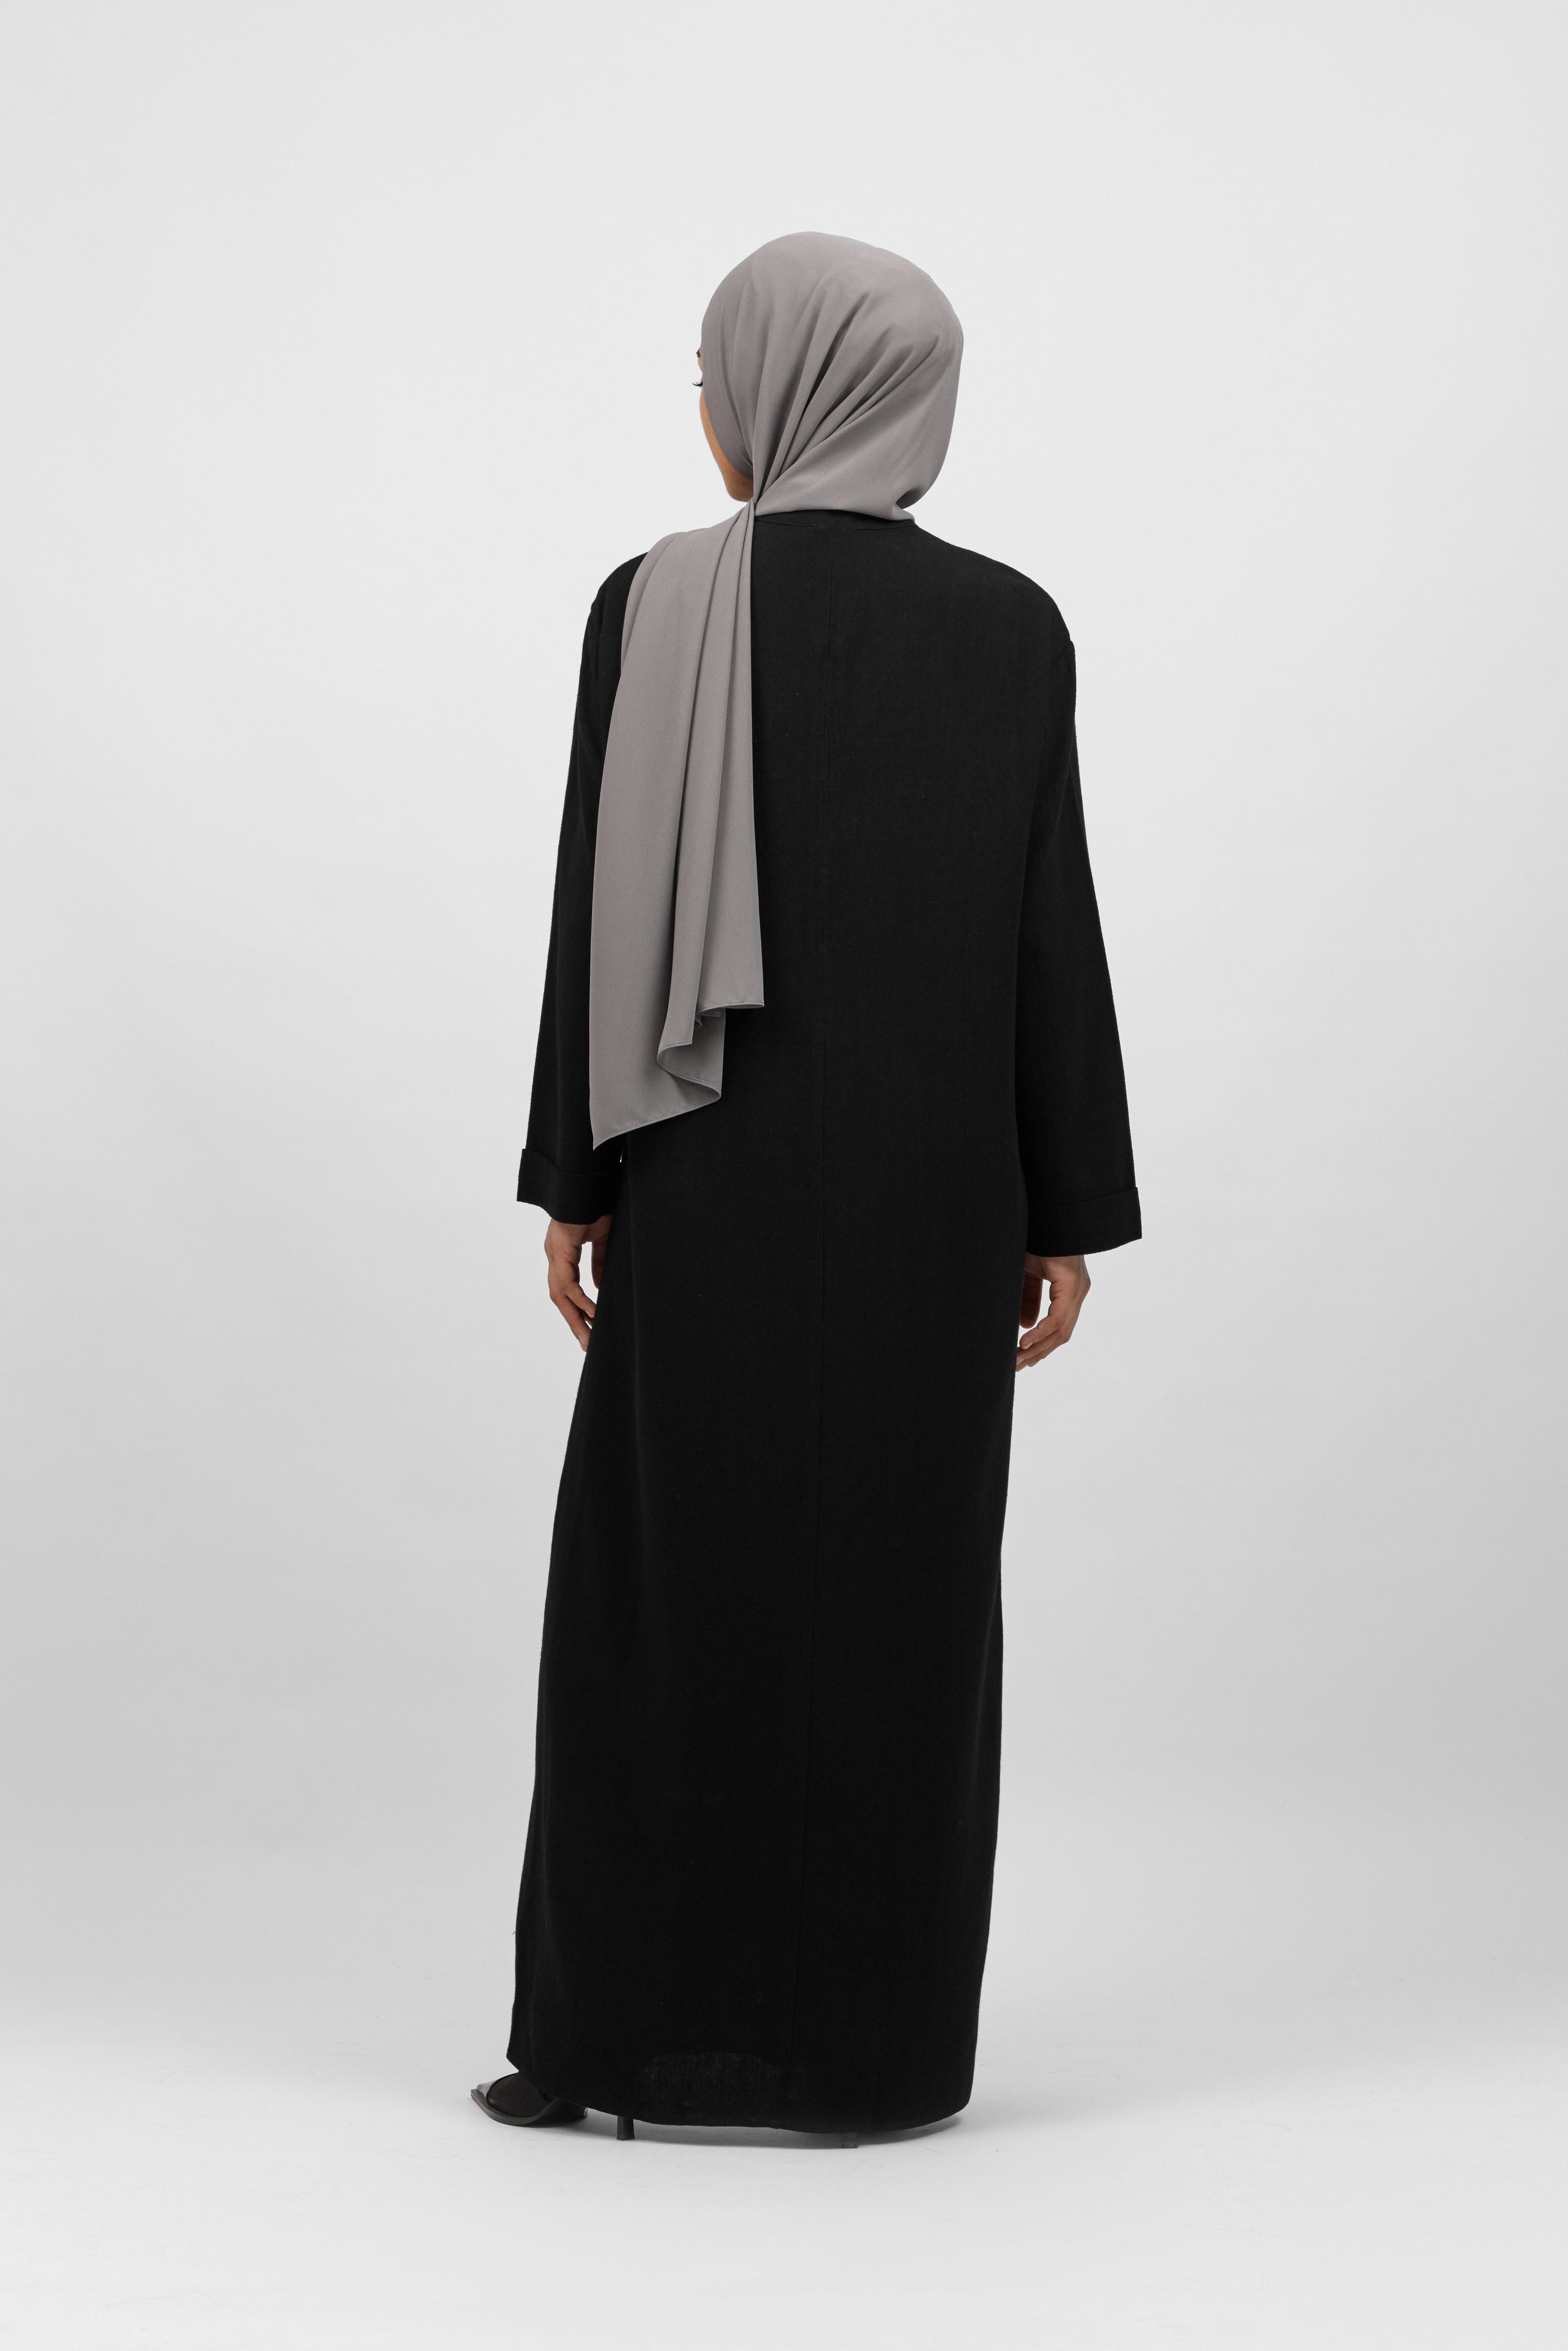 CA - Pearl Relaxed Fit Abaya - Black